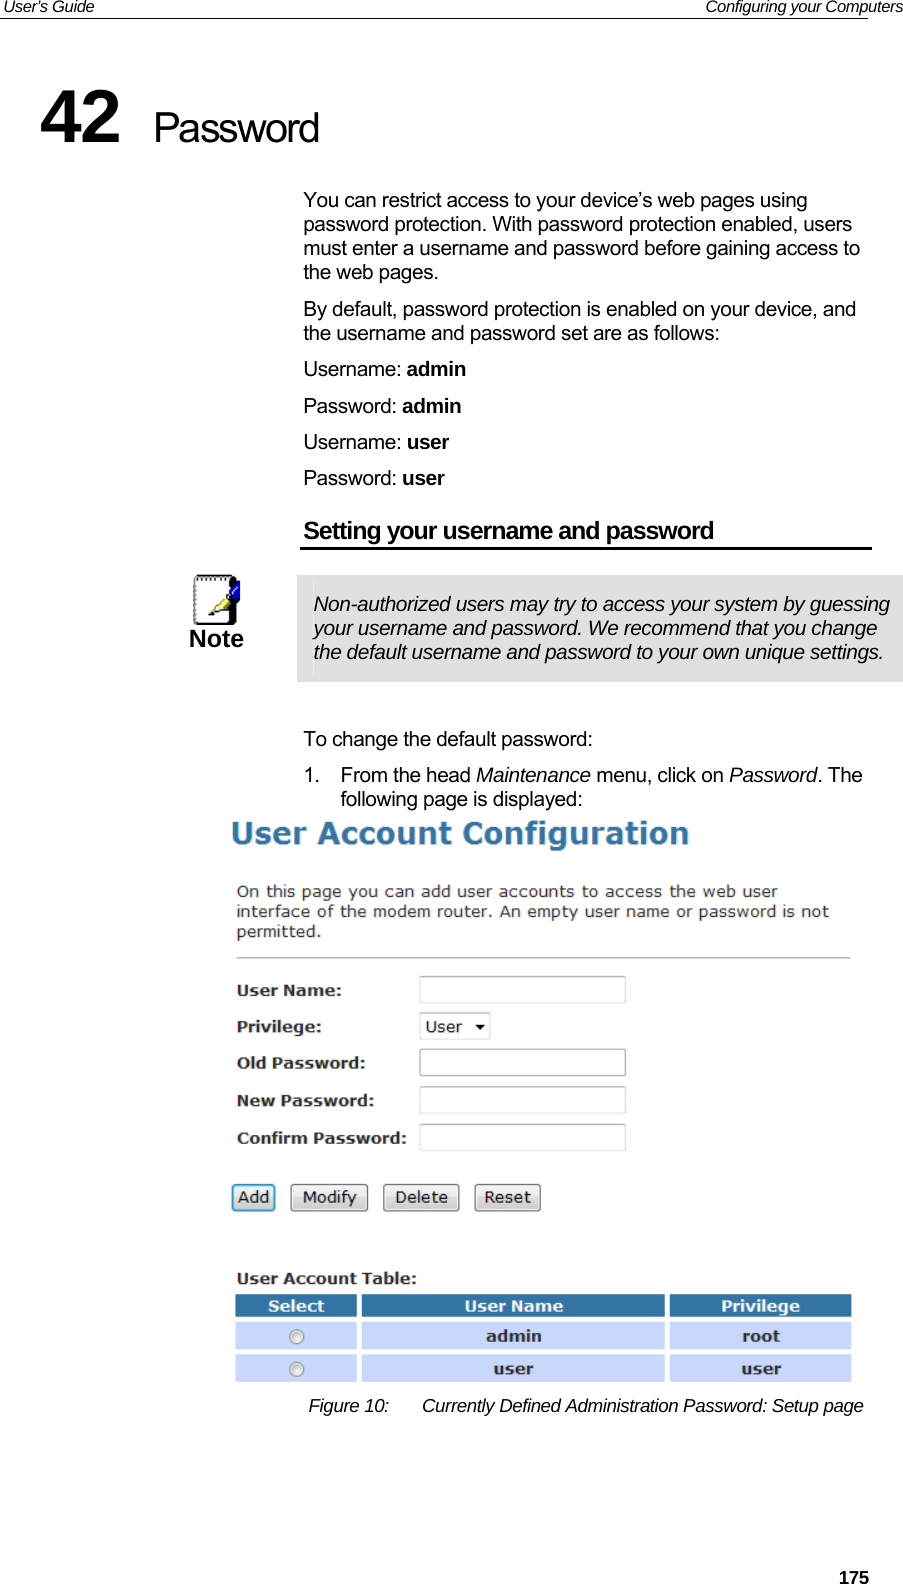 User’s Guide   Configuring your Computers 42  Password You can restrict access to your device’s web pages using password protection. With password protection enabled, users must enter a username and password before gaining access to the web pages. By default, password protection is enabled on your device, and the username and password set are as follows: Username: admin Password: admin Username: user Password: user Setting your username and password  Note  Non-authorized users may try to access your system by guessing your username and password. We recommend that you change the default username and password to your own unique settings.  To change the default password: 1. From the head Maintenance menu, click on Password. The following page is displayed:  Figure 10:  Currently Defined Administration Password: Setup page    175